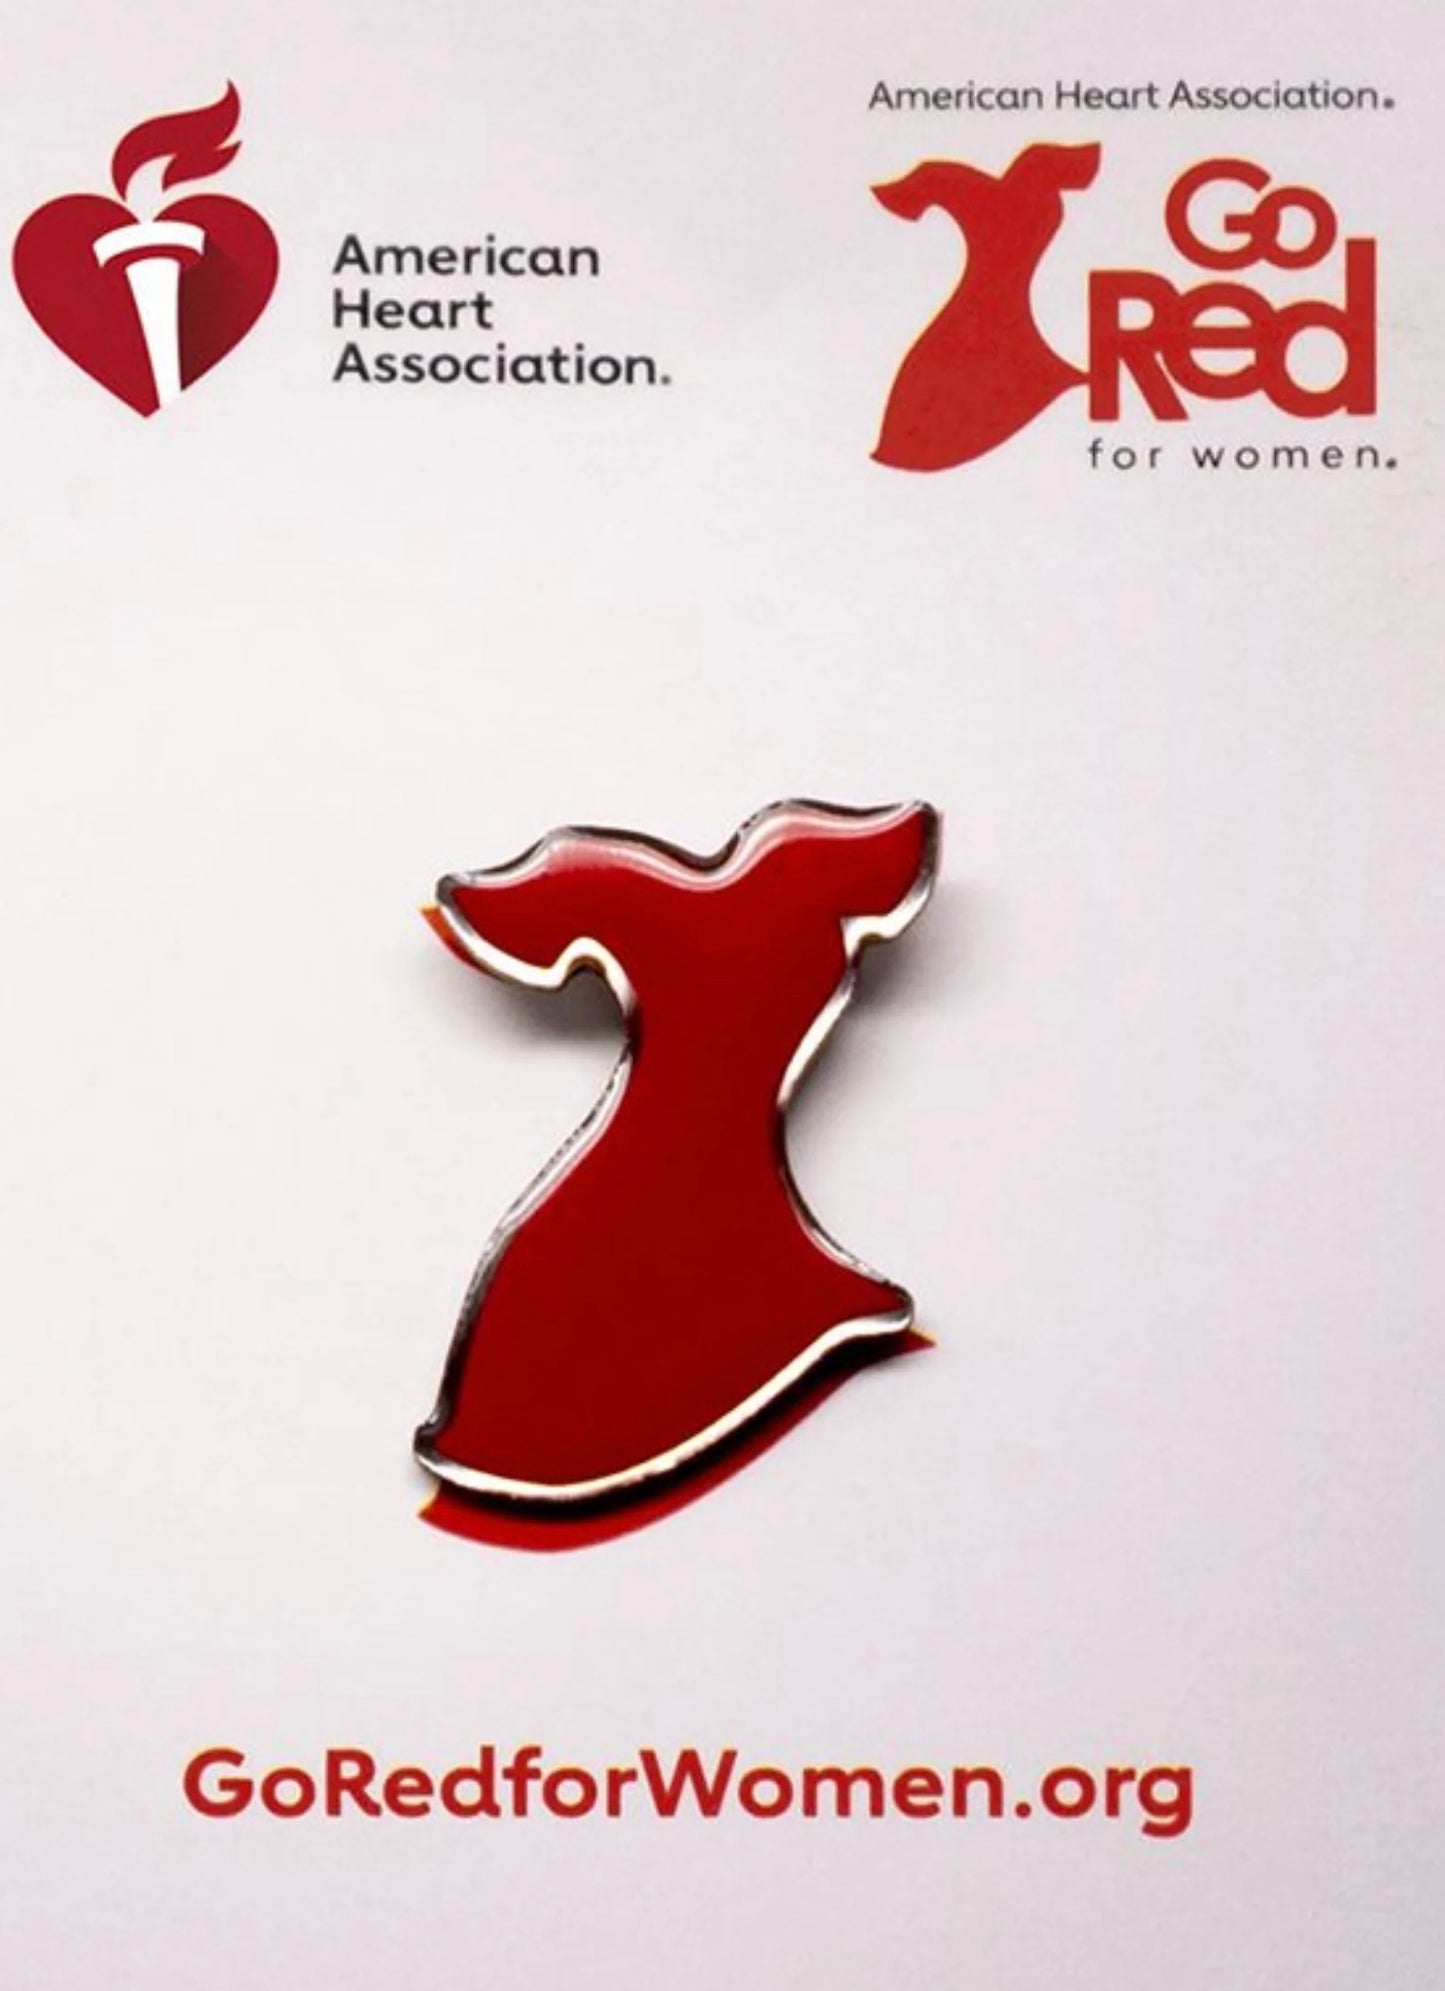 Go Red Lapel Pin